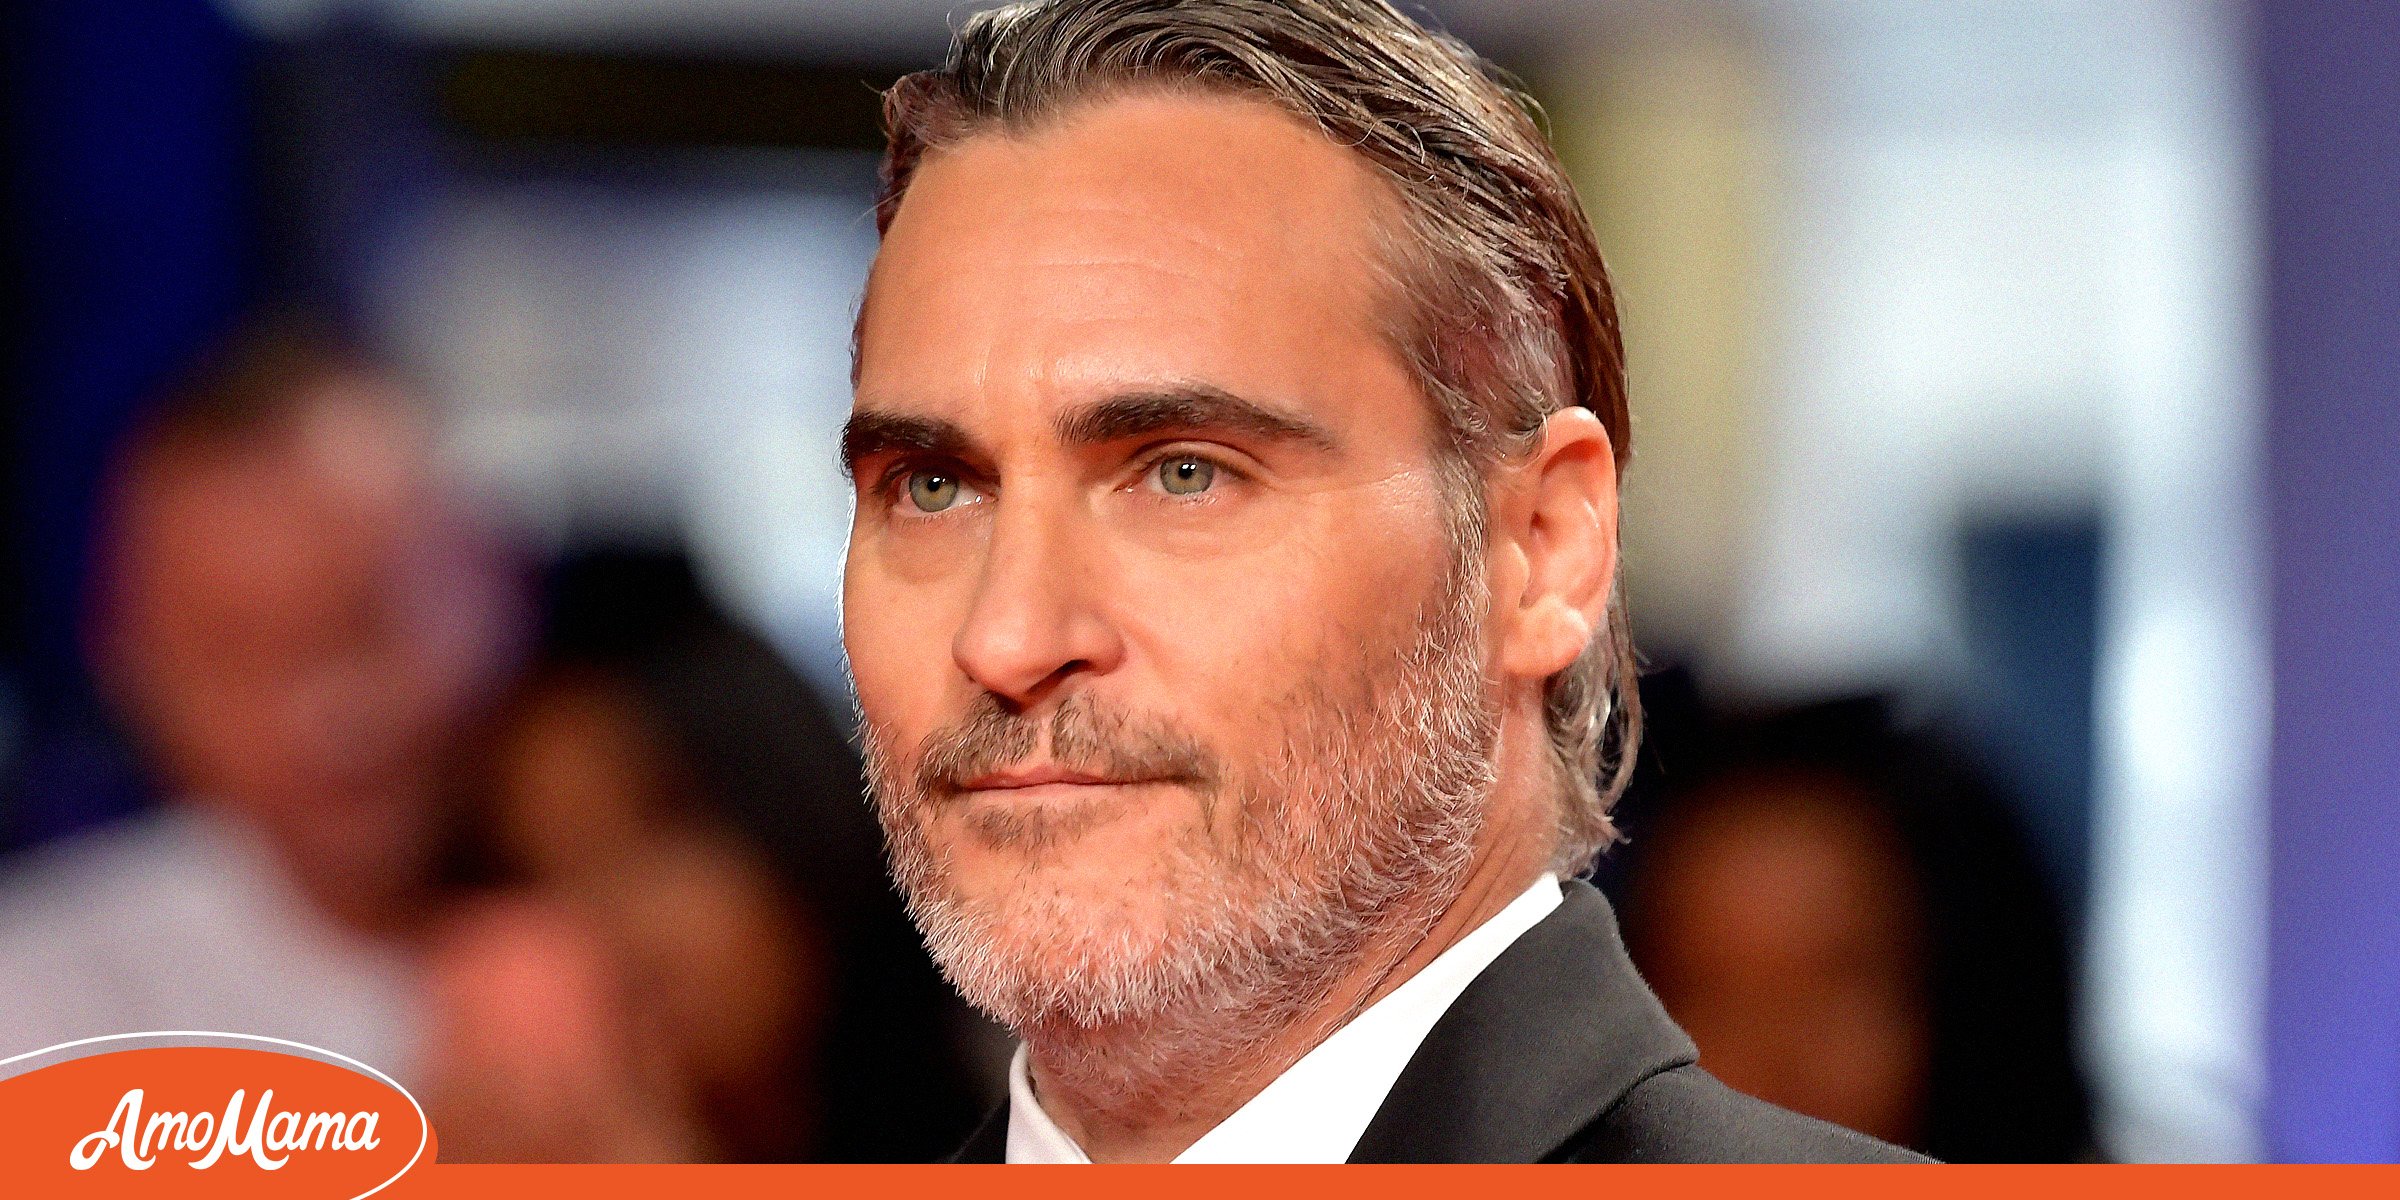 How Did Joaquin Phoenix Get the Scar on His Lip?